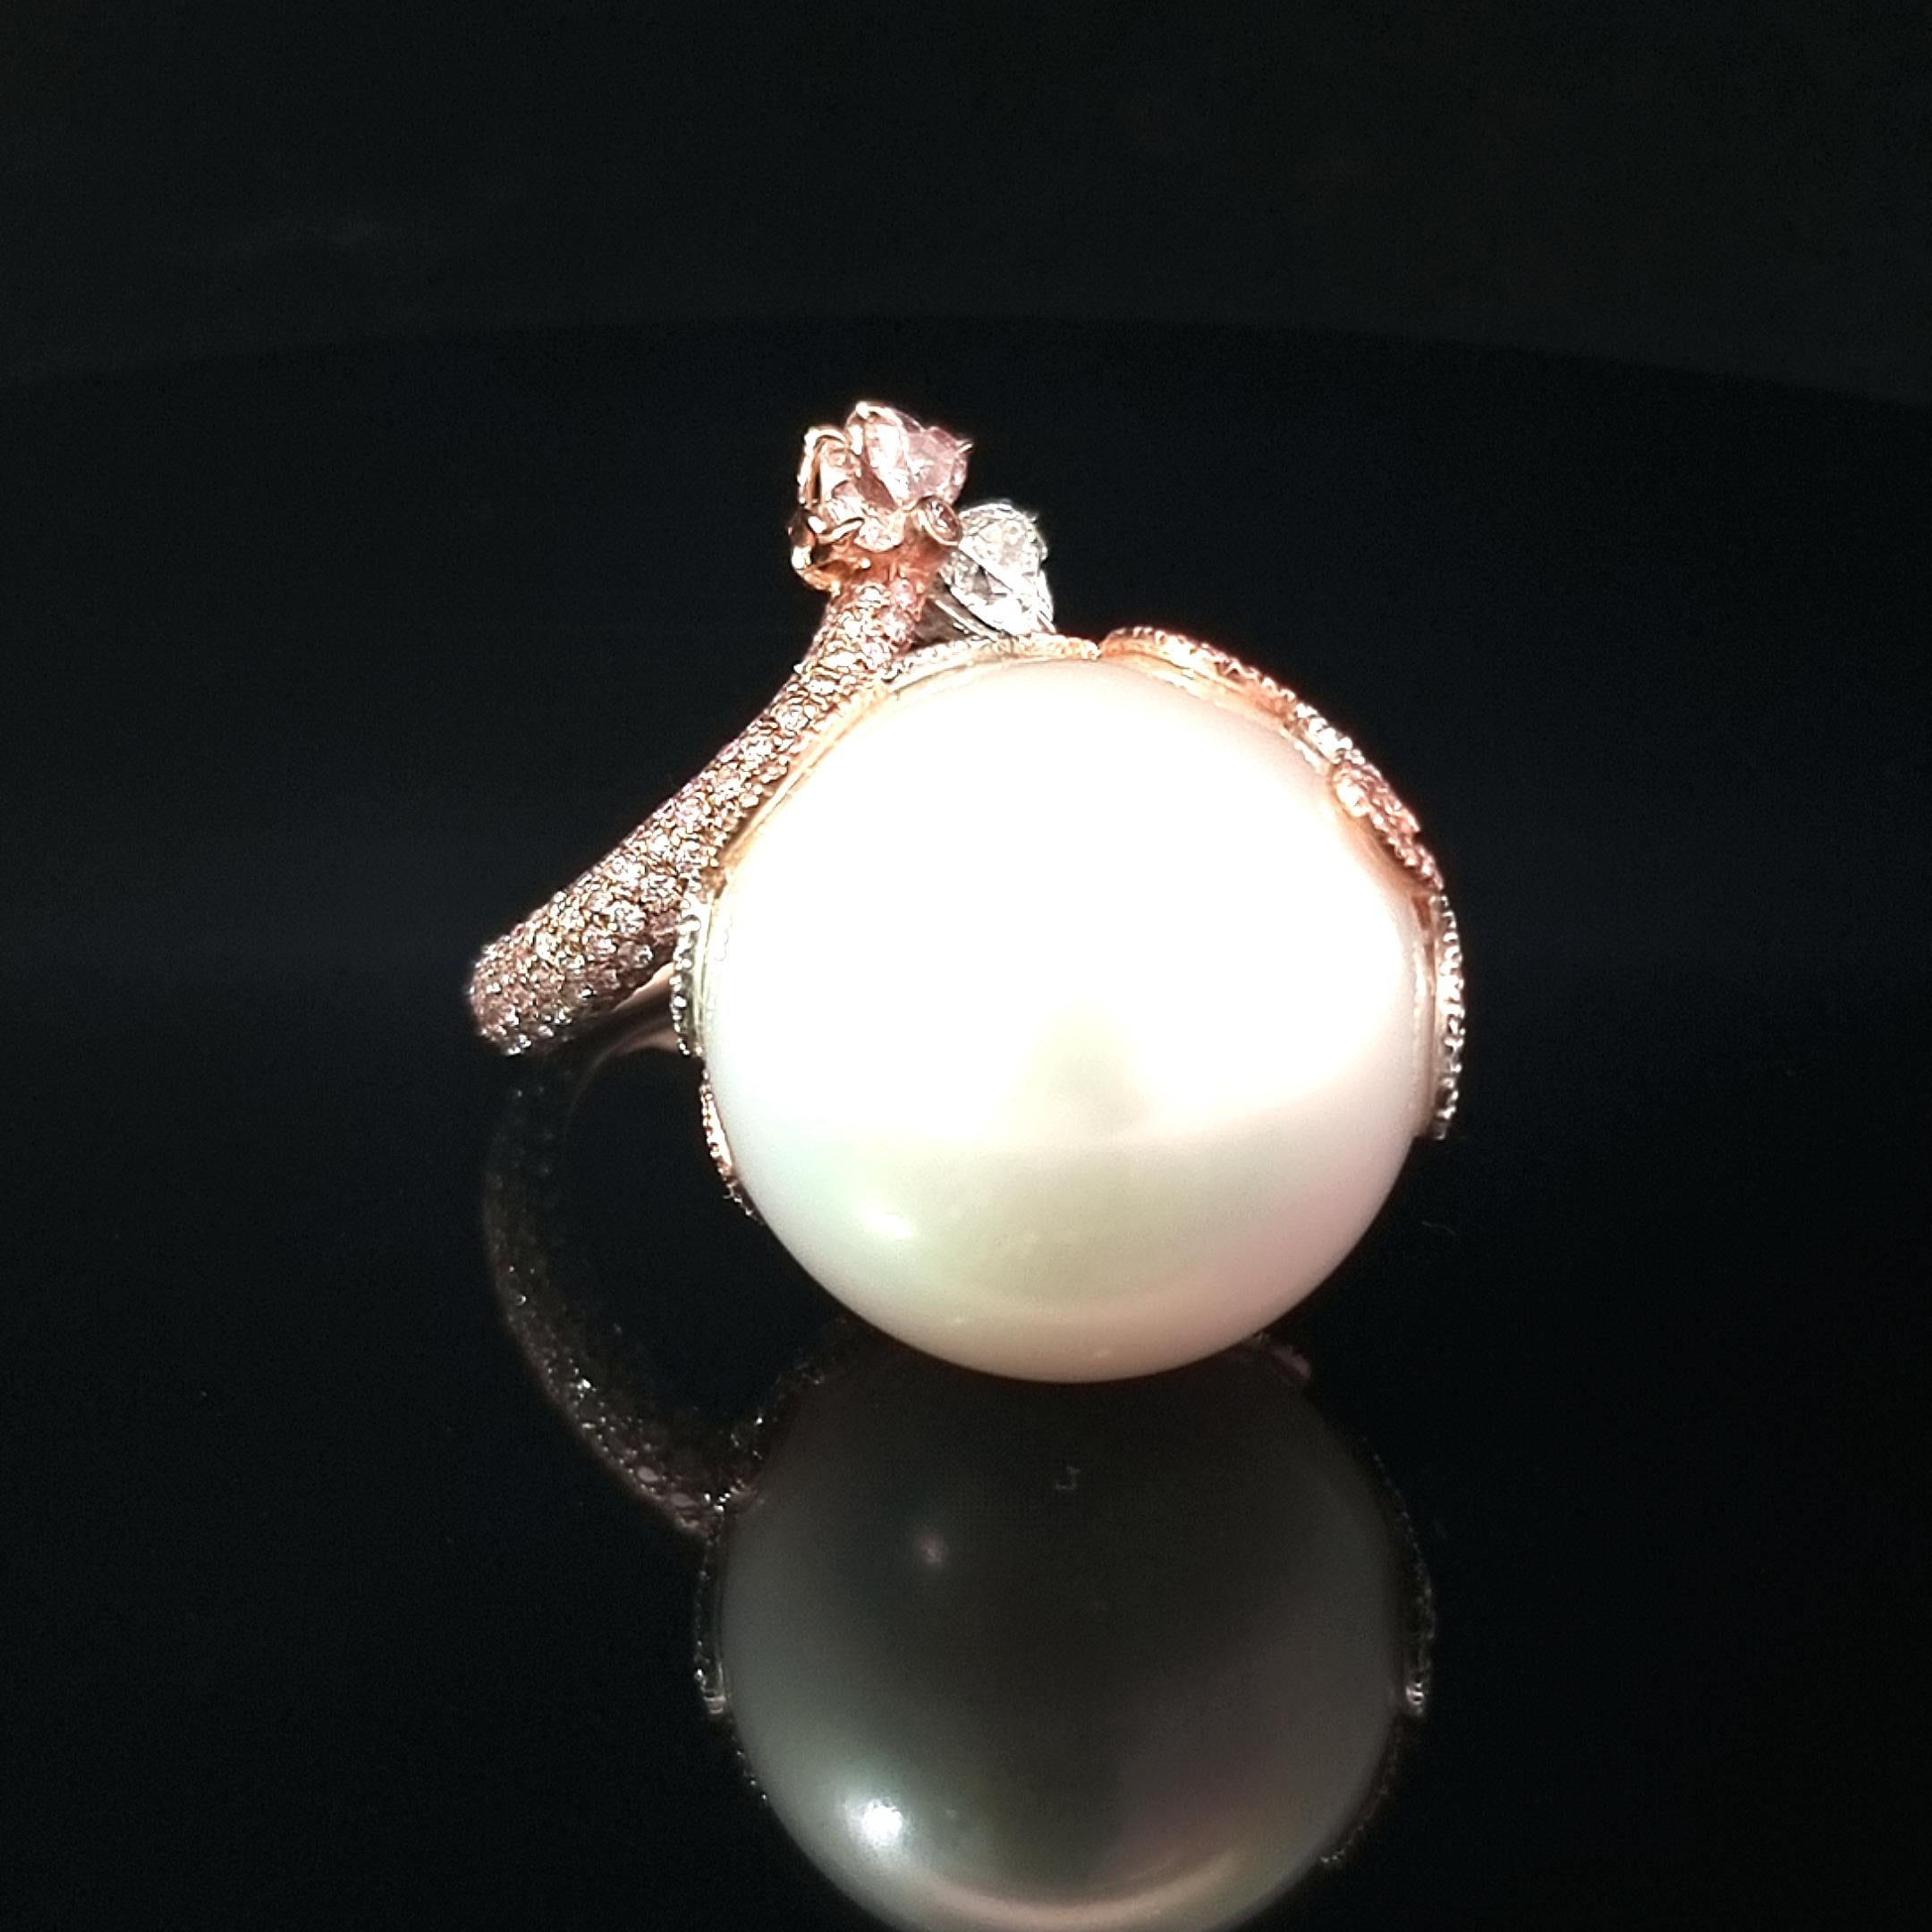 Something from our private collection.

Experience the epitome of elegance and luxury with this exceptional pink gold ring by Autore. At its heart, a magnificent 21mm South Sea pearl takes center stage, exuding timeless beauty. A symphony of